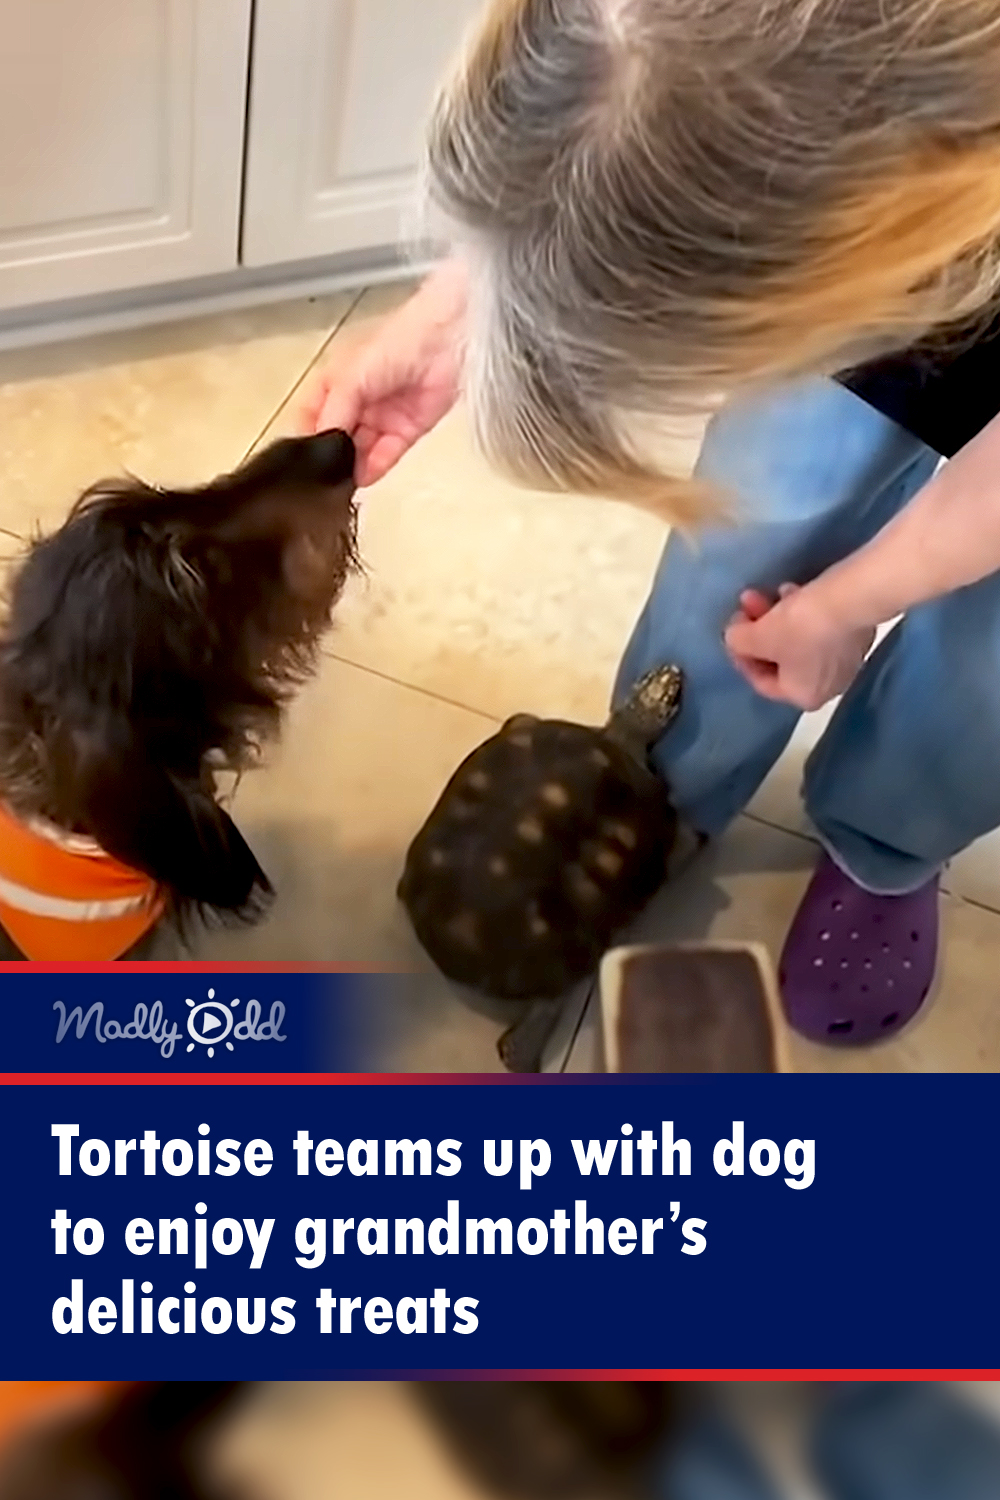 Tortoise teams up with dog to enjoy grandmother’s delicious treats